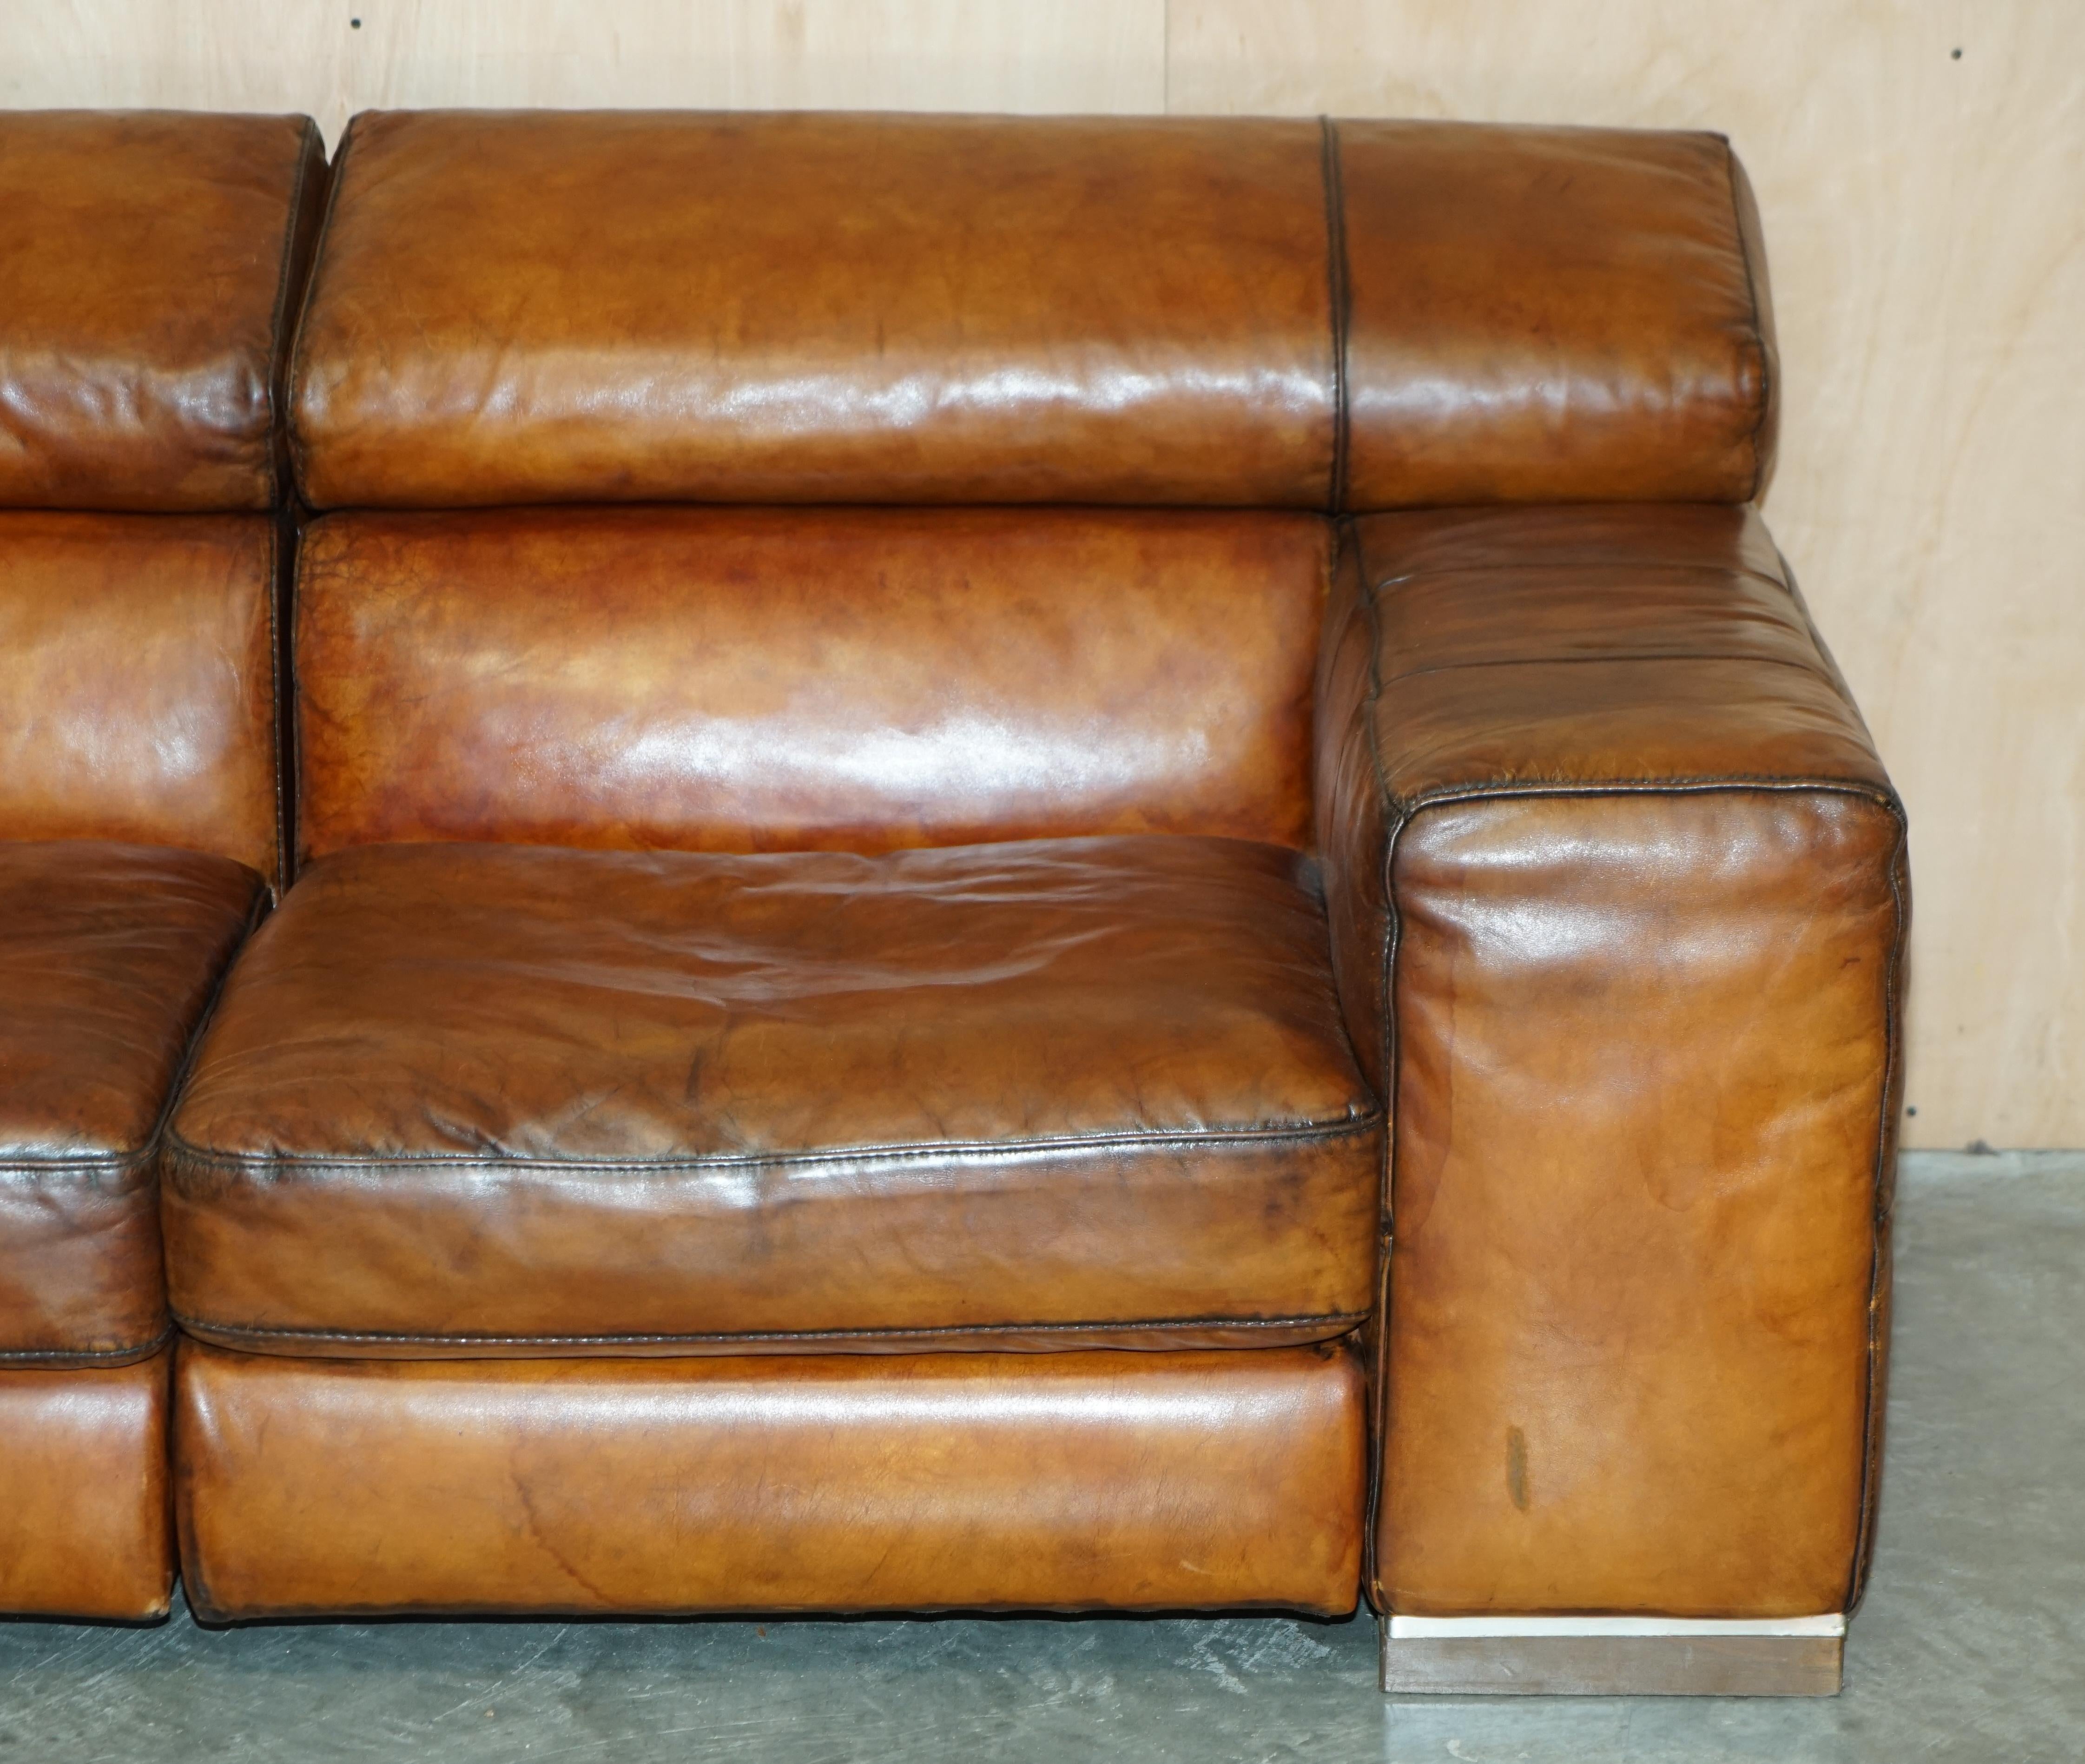 Natuzzi Roma Hand Dyed Cigar Brown Leather Sofa Raising Headrest Part of a Suite For Sale 1